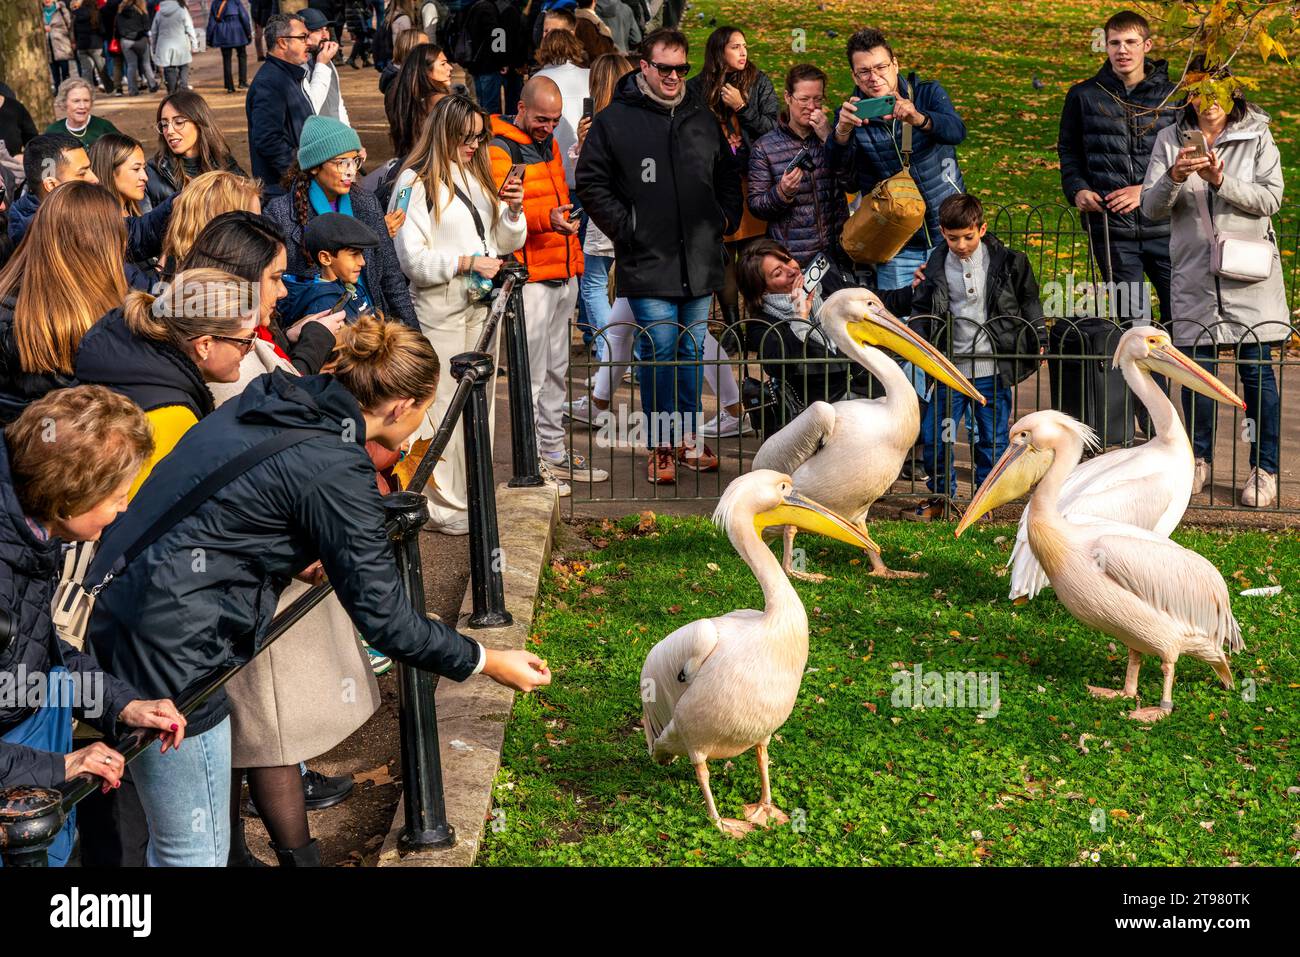 People Taking Photographs of The Pelicans In St James's Park, London, UK Stock Photo